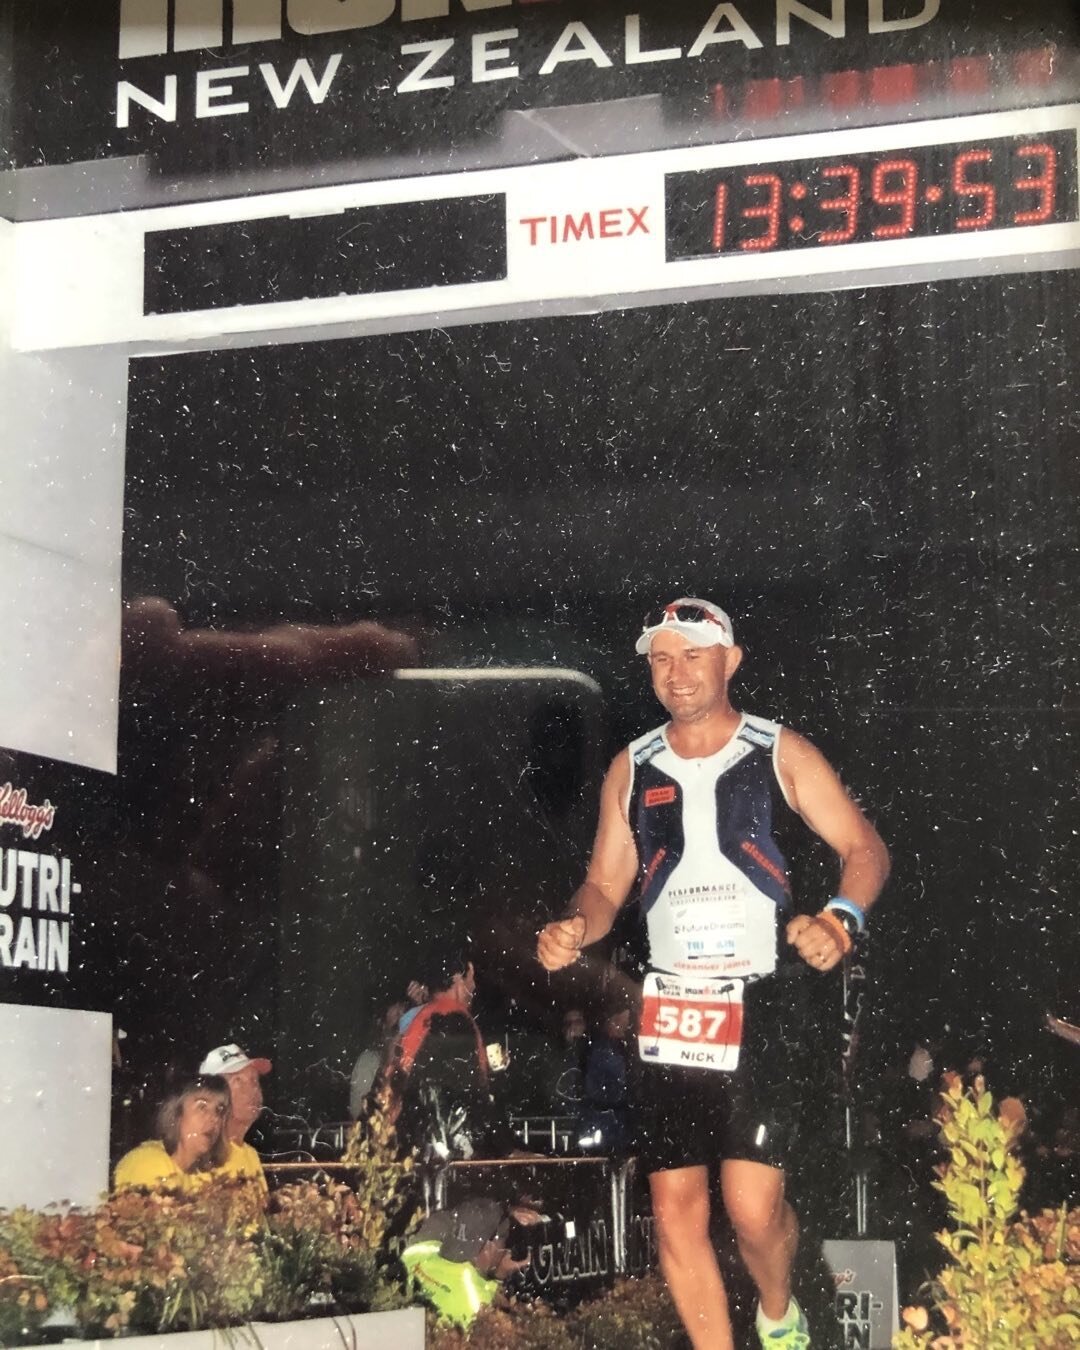 Rehab2ultraman yes. 27th March 2021 Ironman New Zealand back on. That&rsquo;s great news.